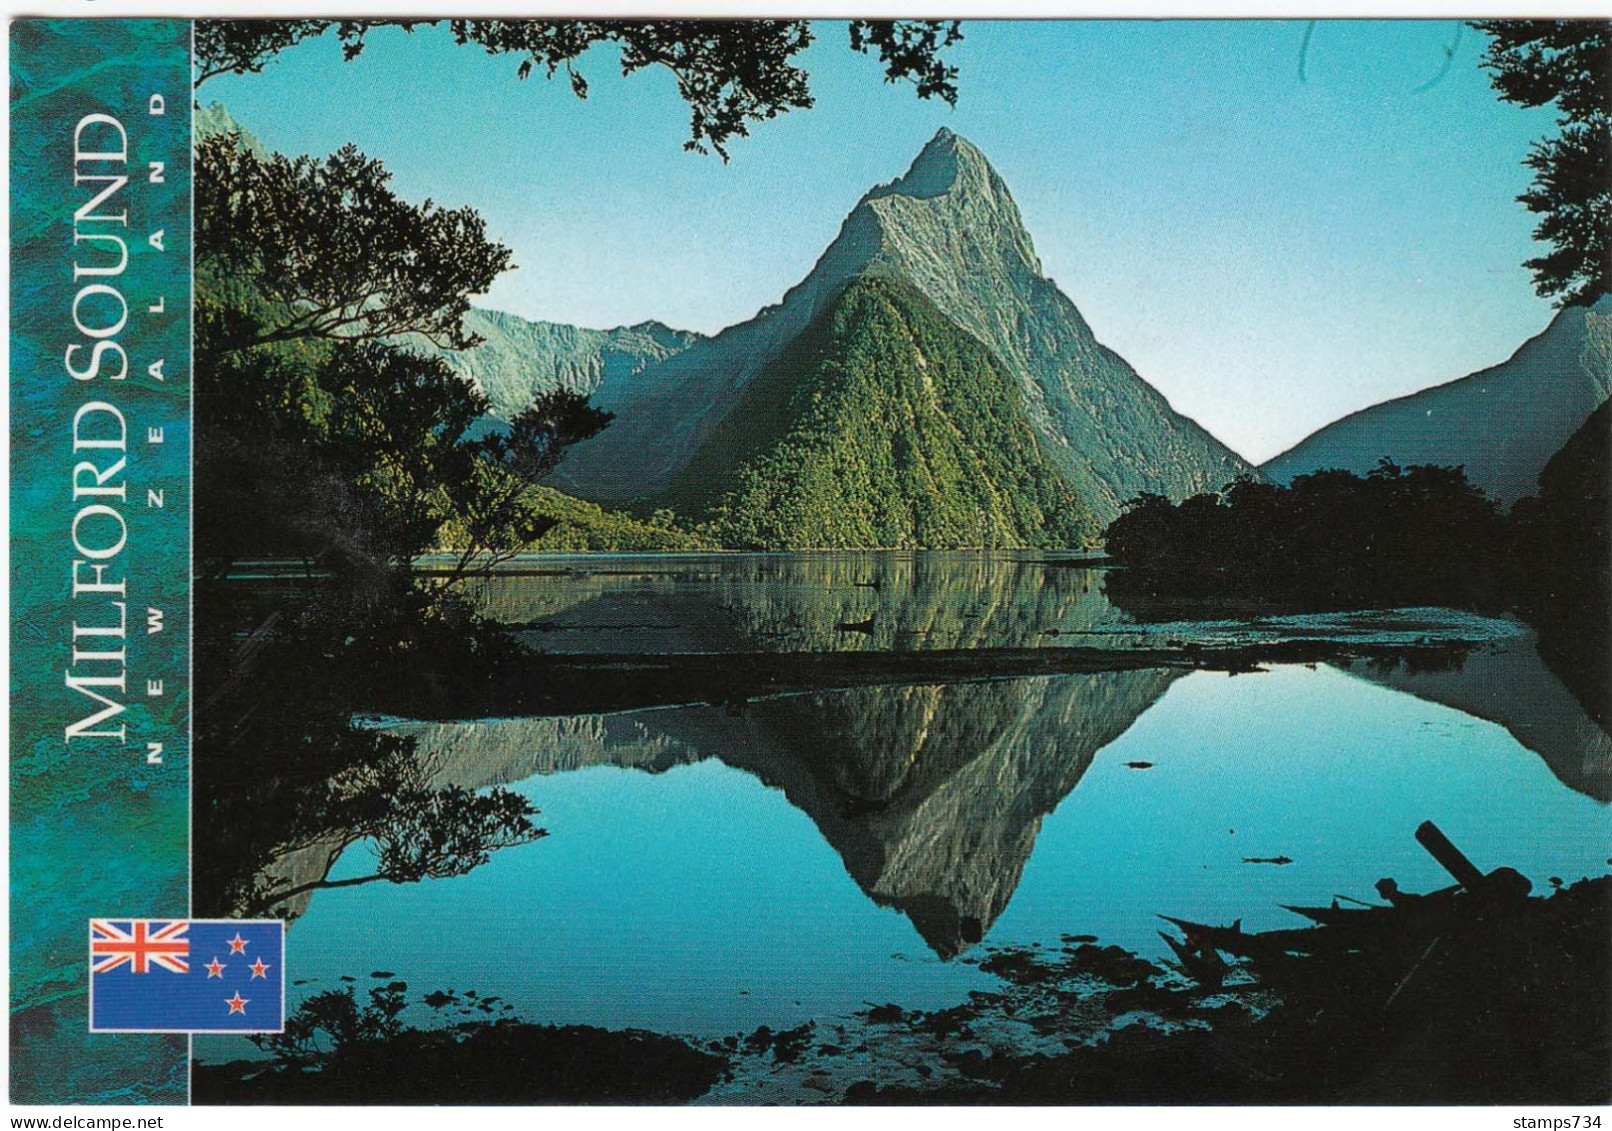 New Zealand-04/2010 - 1.80 NZD - Christmas, Mitre Peak(1695 M), Reflected In Milford Sound, Post Card(2 Scan) - Covers & Documents